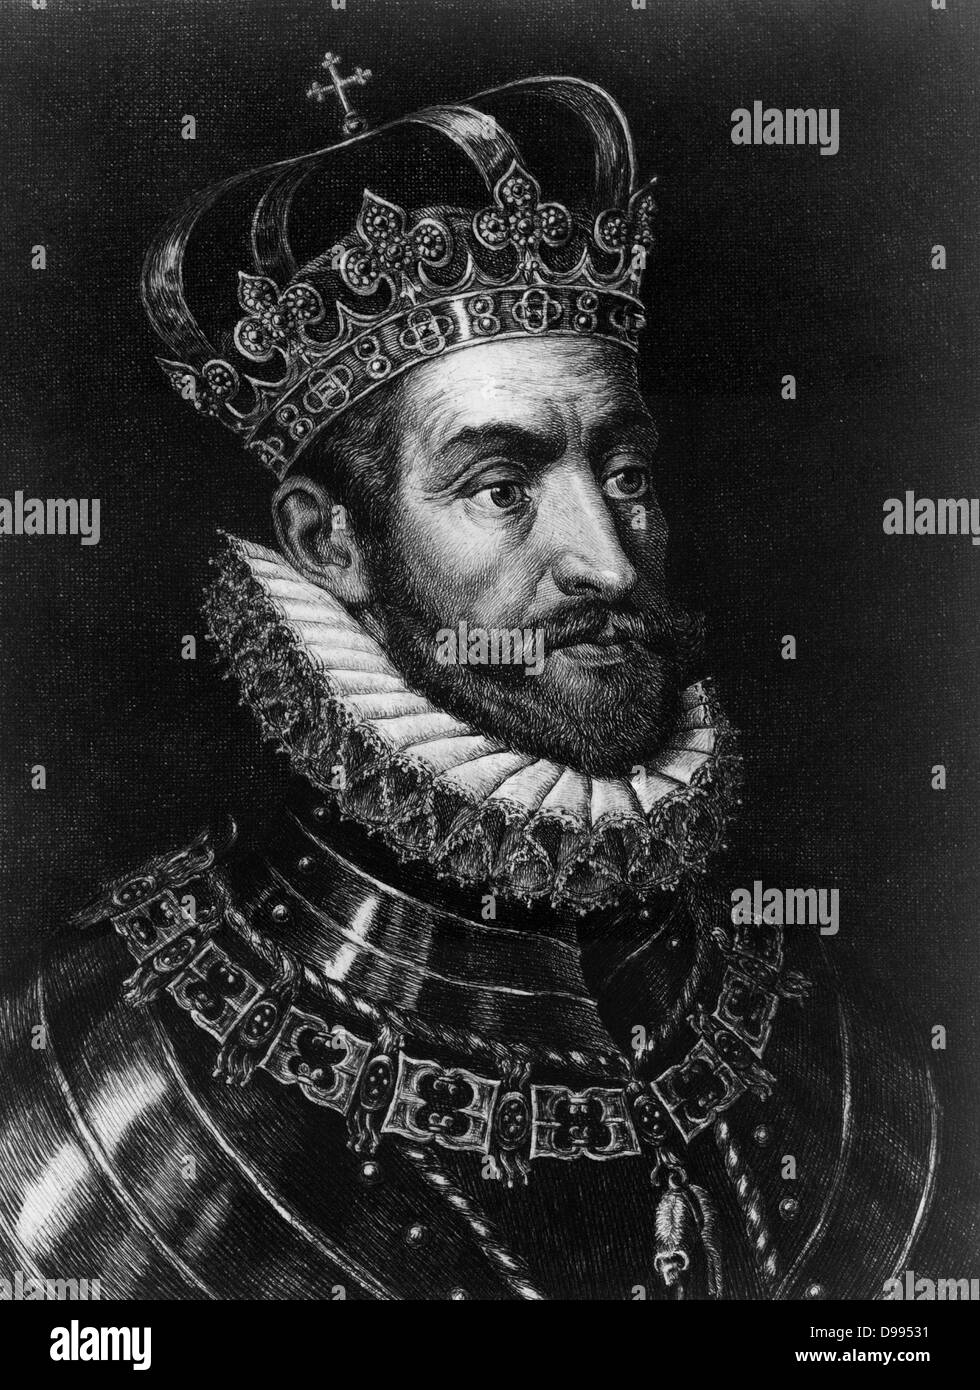 Charles V (1500-1558) Charles I of Spain 1519-1556, Holy Roman Empire 1519-1558. Portrait engraving showing him wearing crown and the Order of the Golden Fleece. Stock Photo